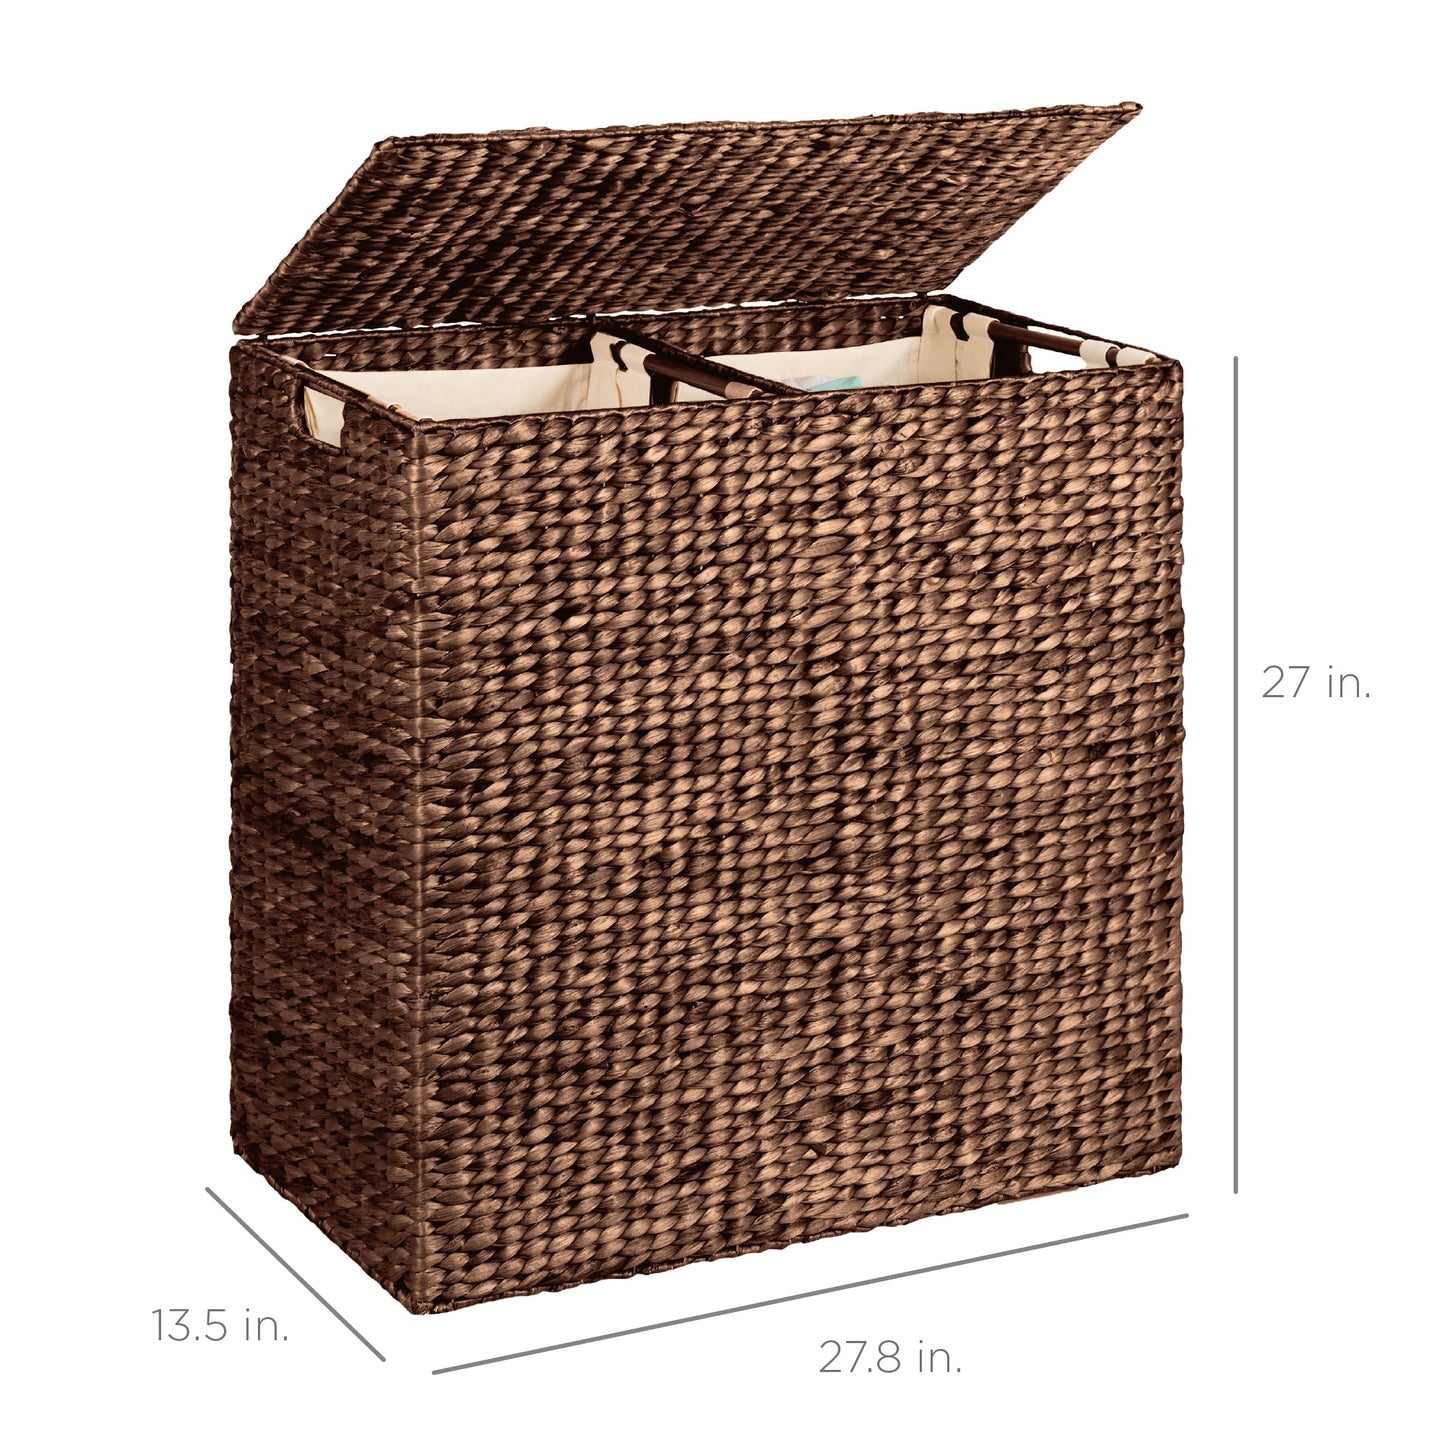 Extra Large Water Hyacinth Double Laundry Hamper Basket w/ 2 Liner Bags